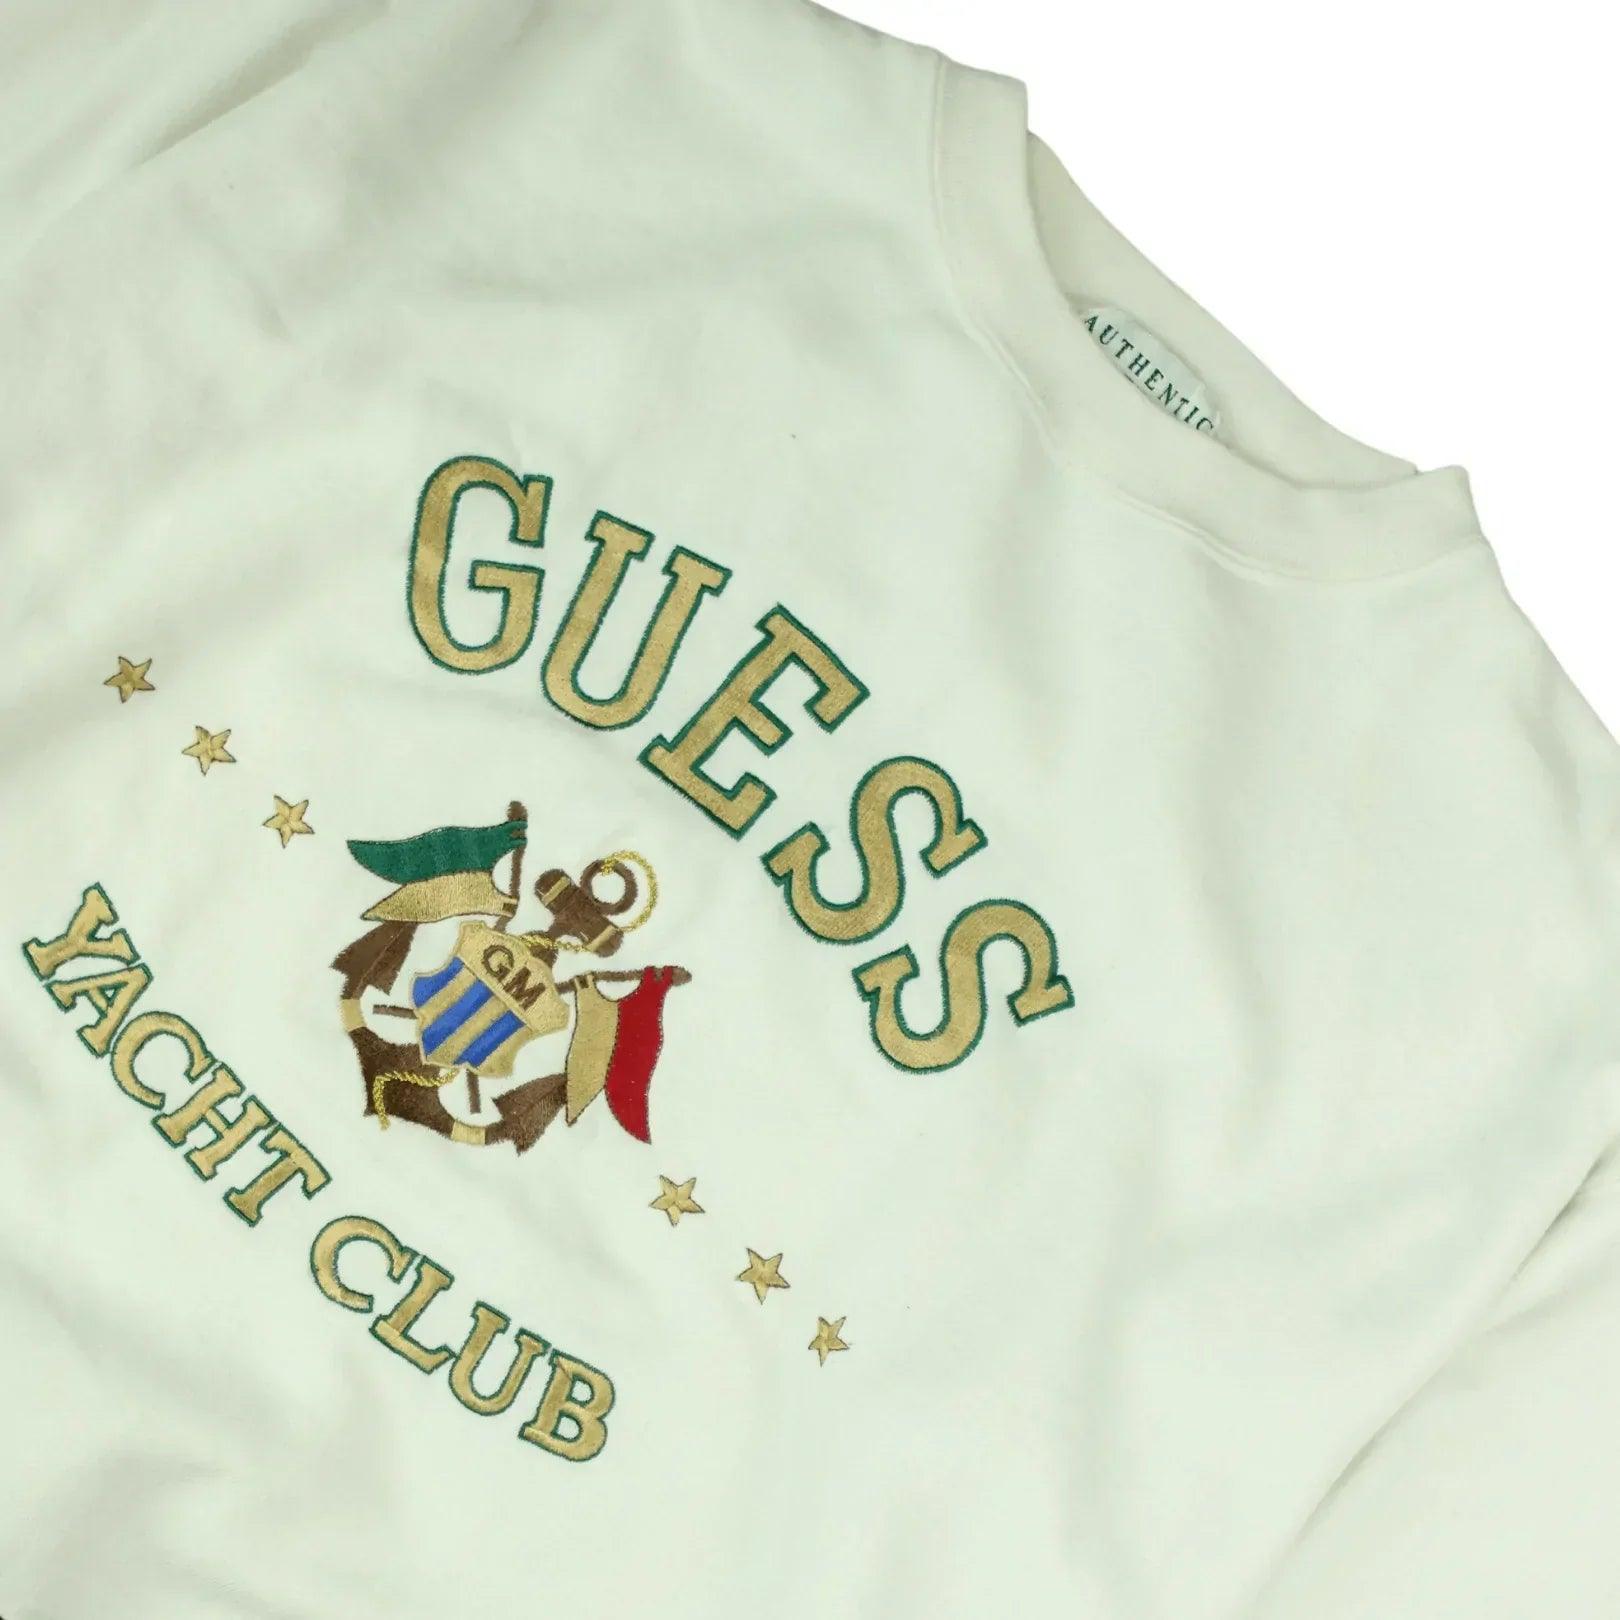 GUESS YATCH CLUB SWEATER (S) - Known Source